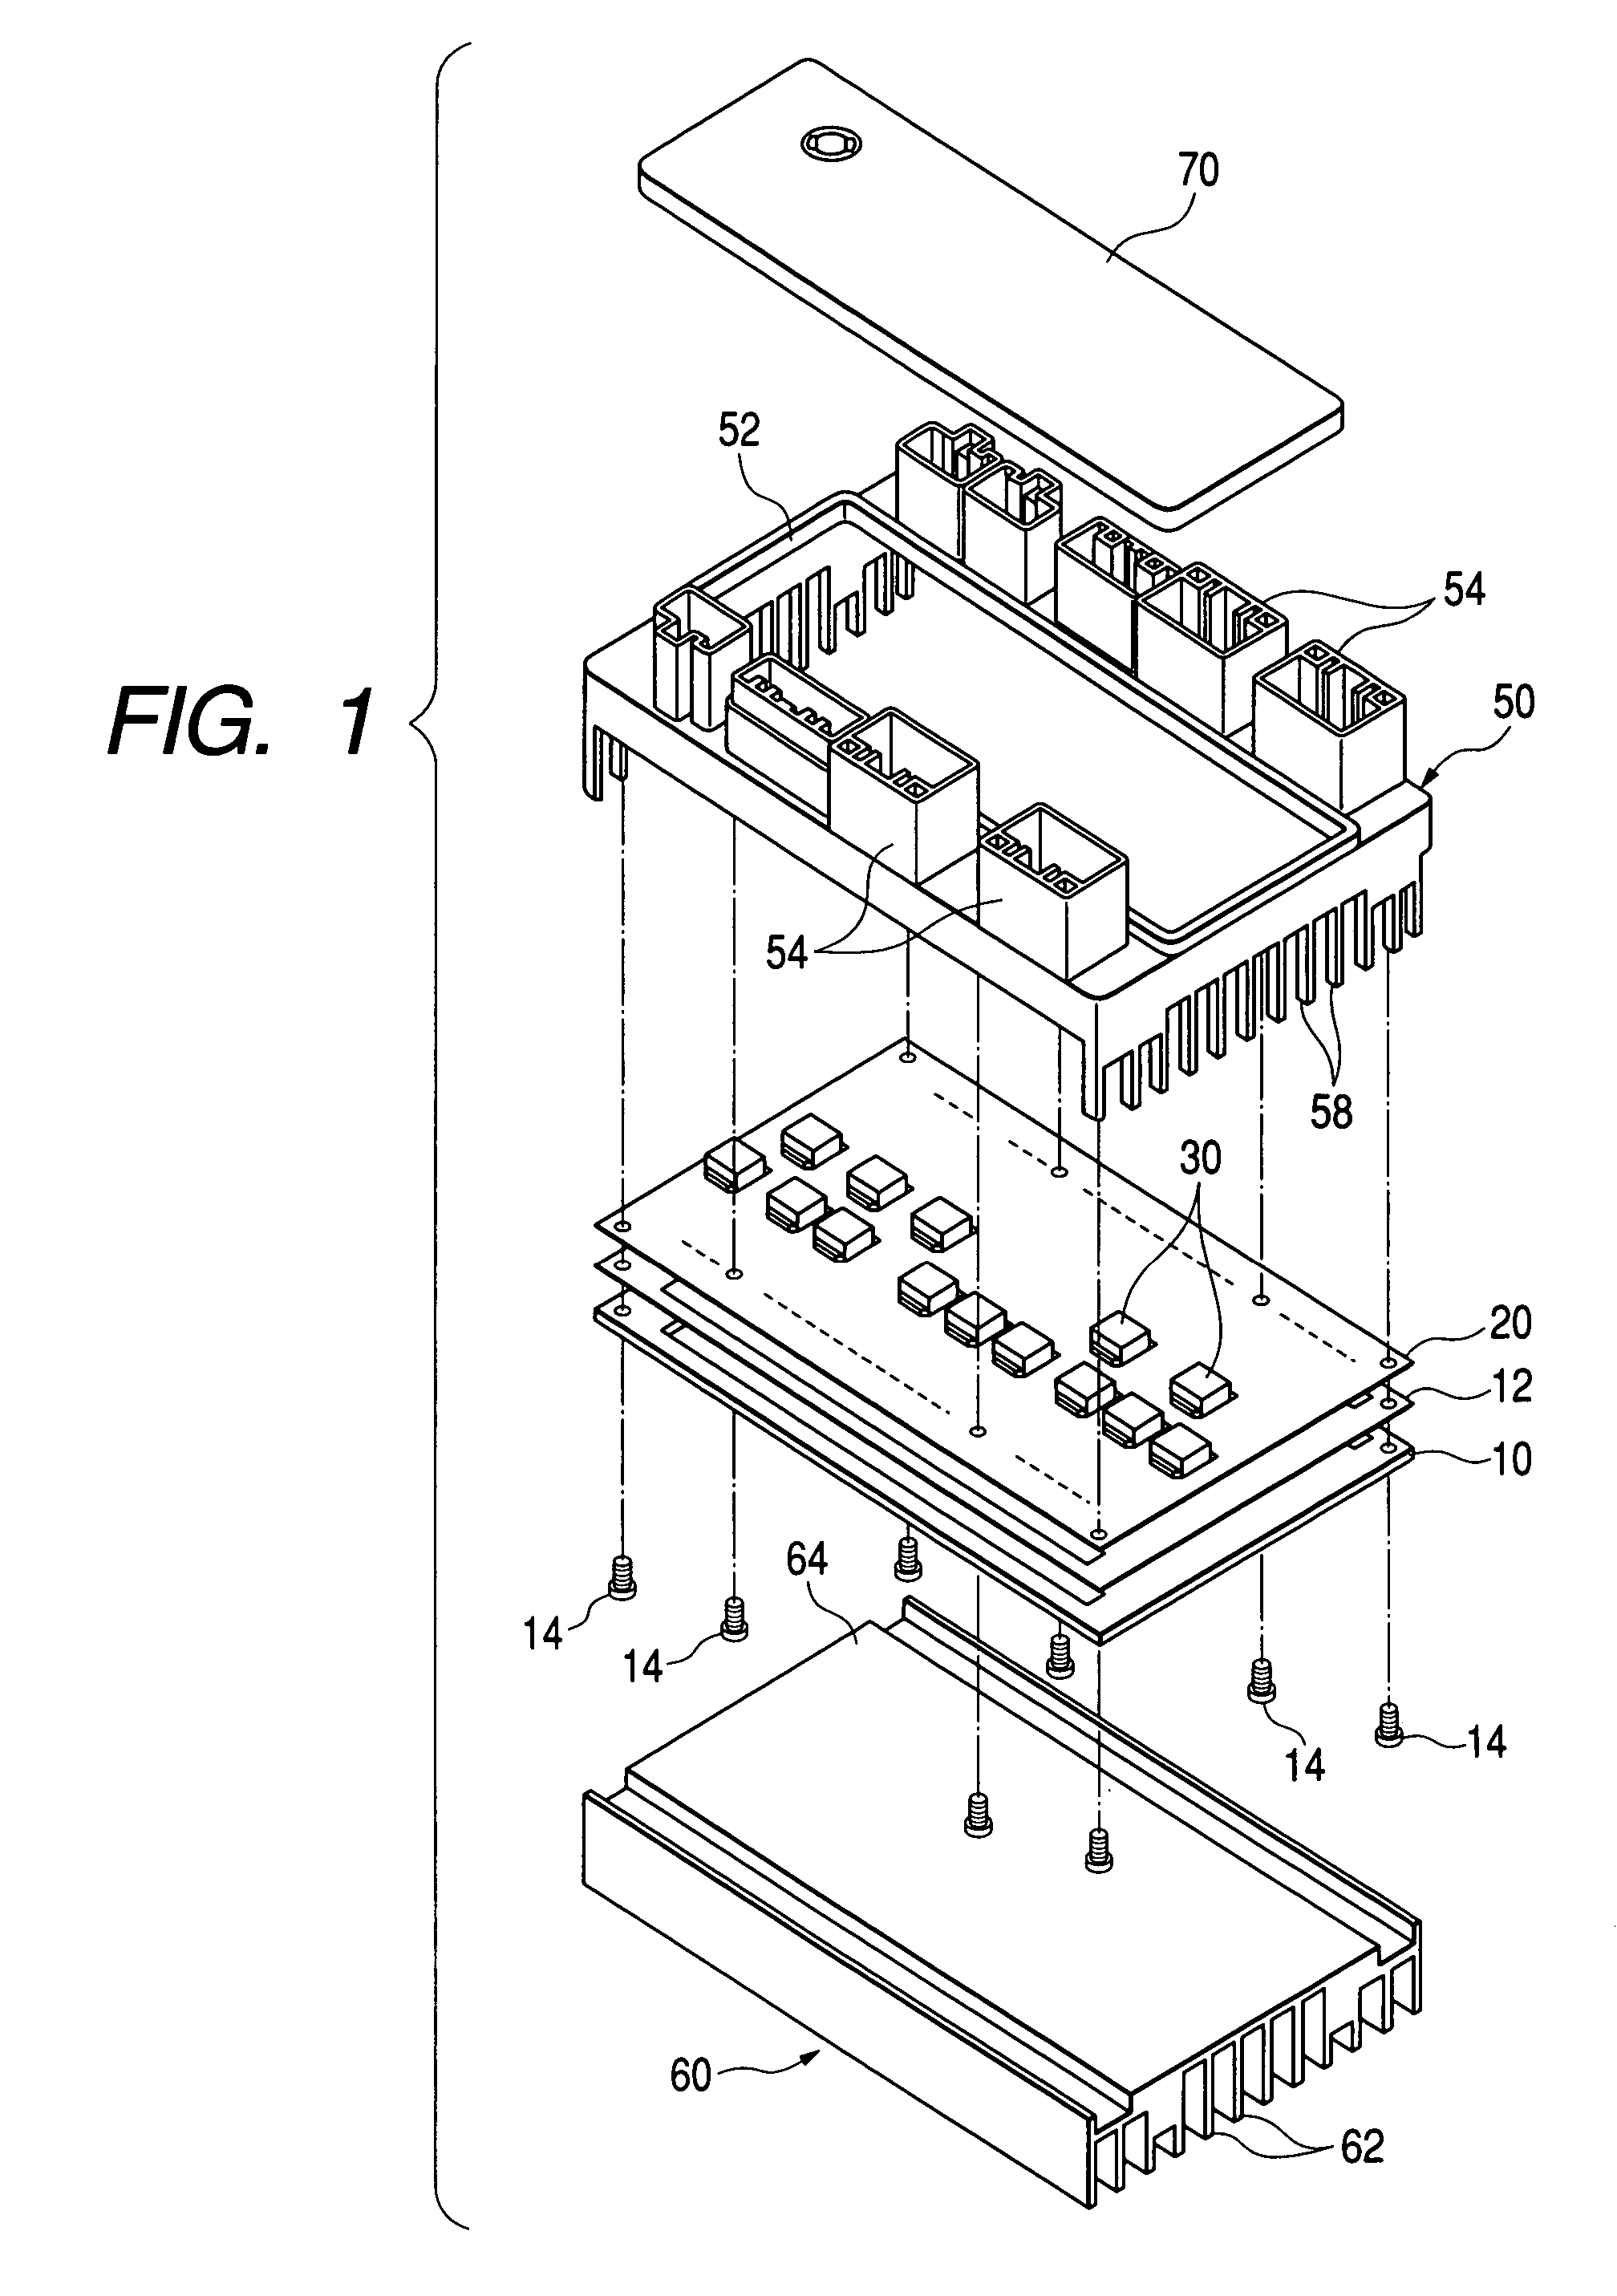 Circuit structural body and method for manufacturing the same